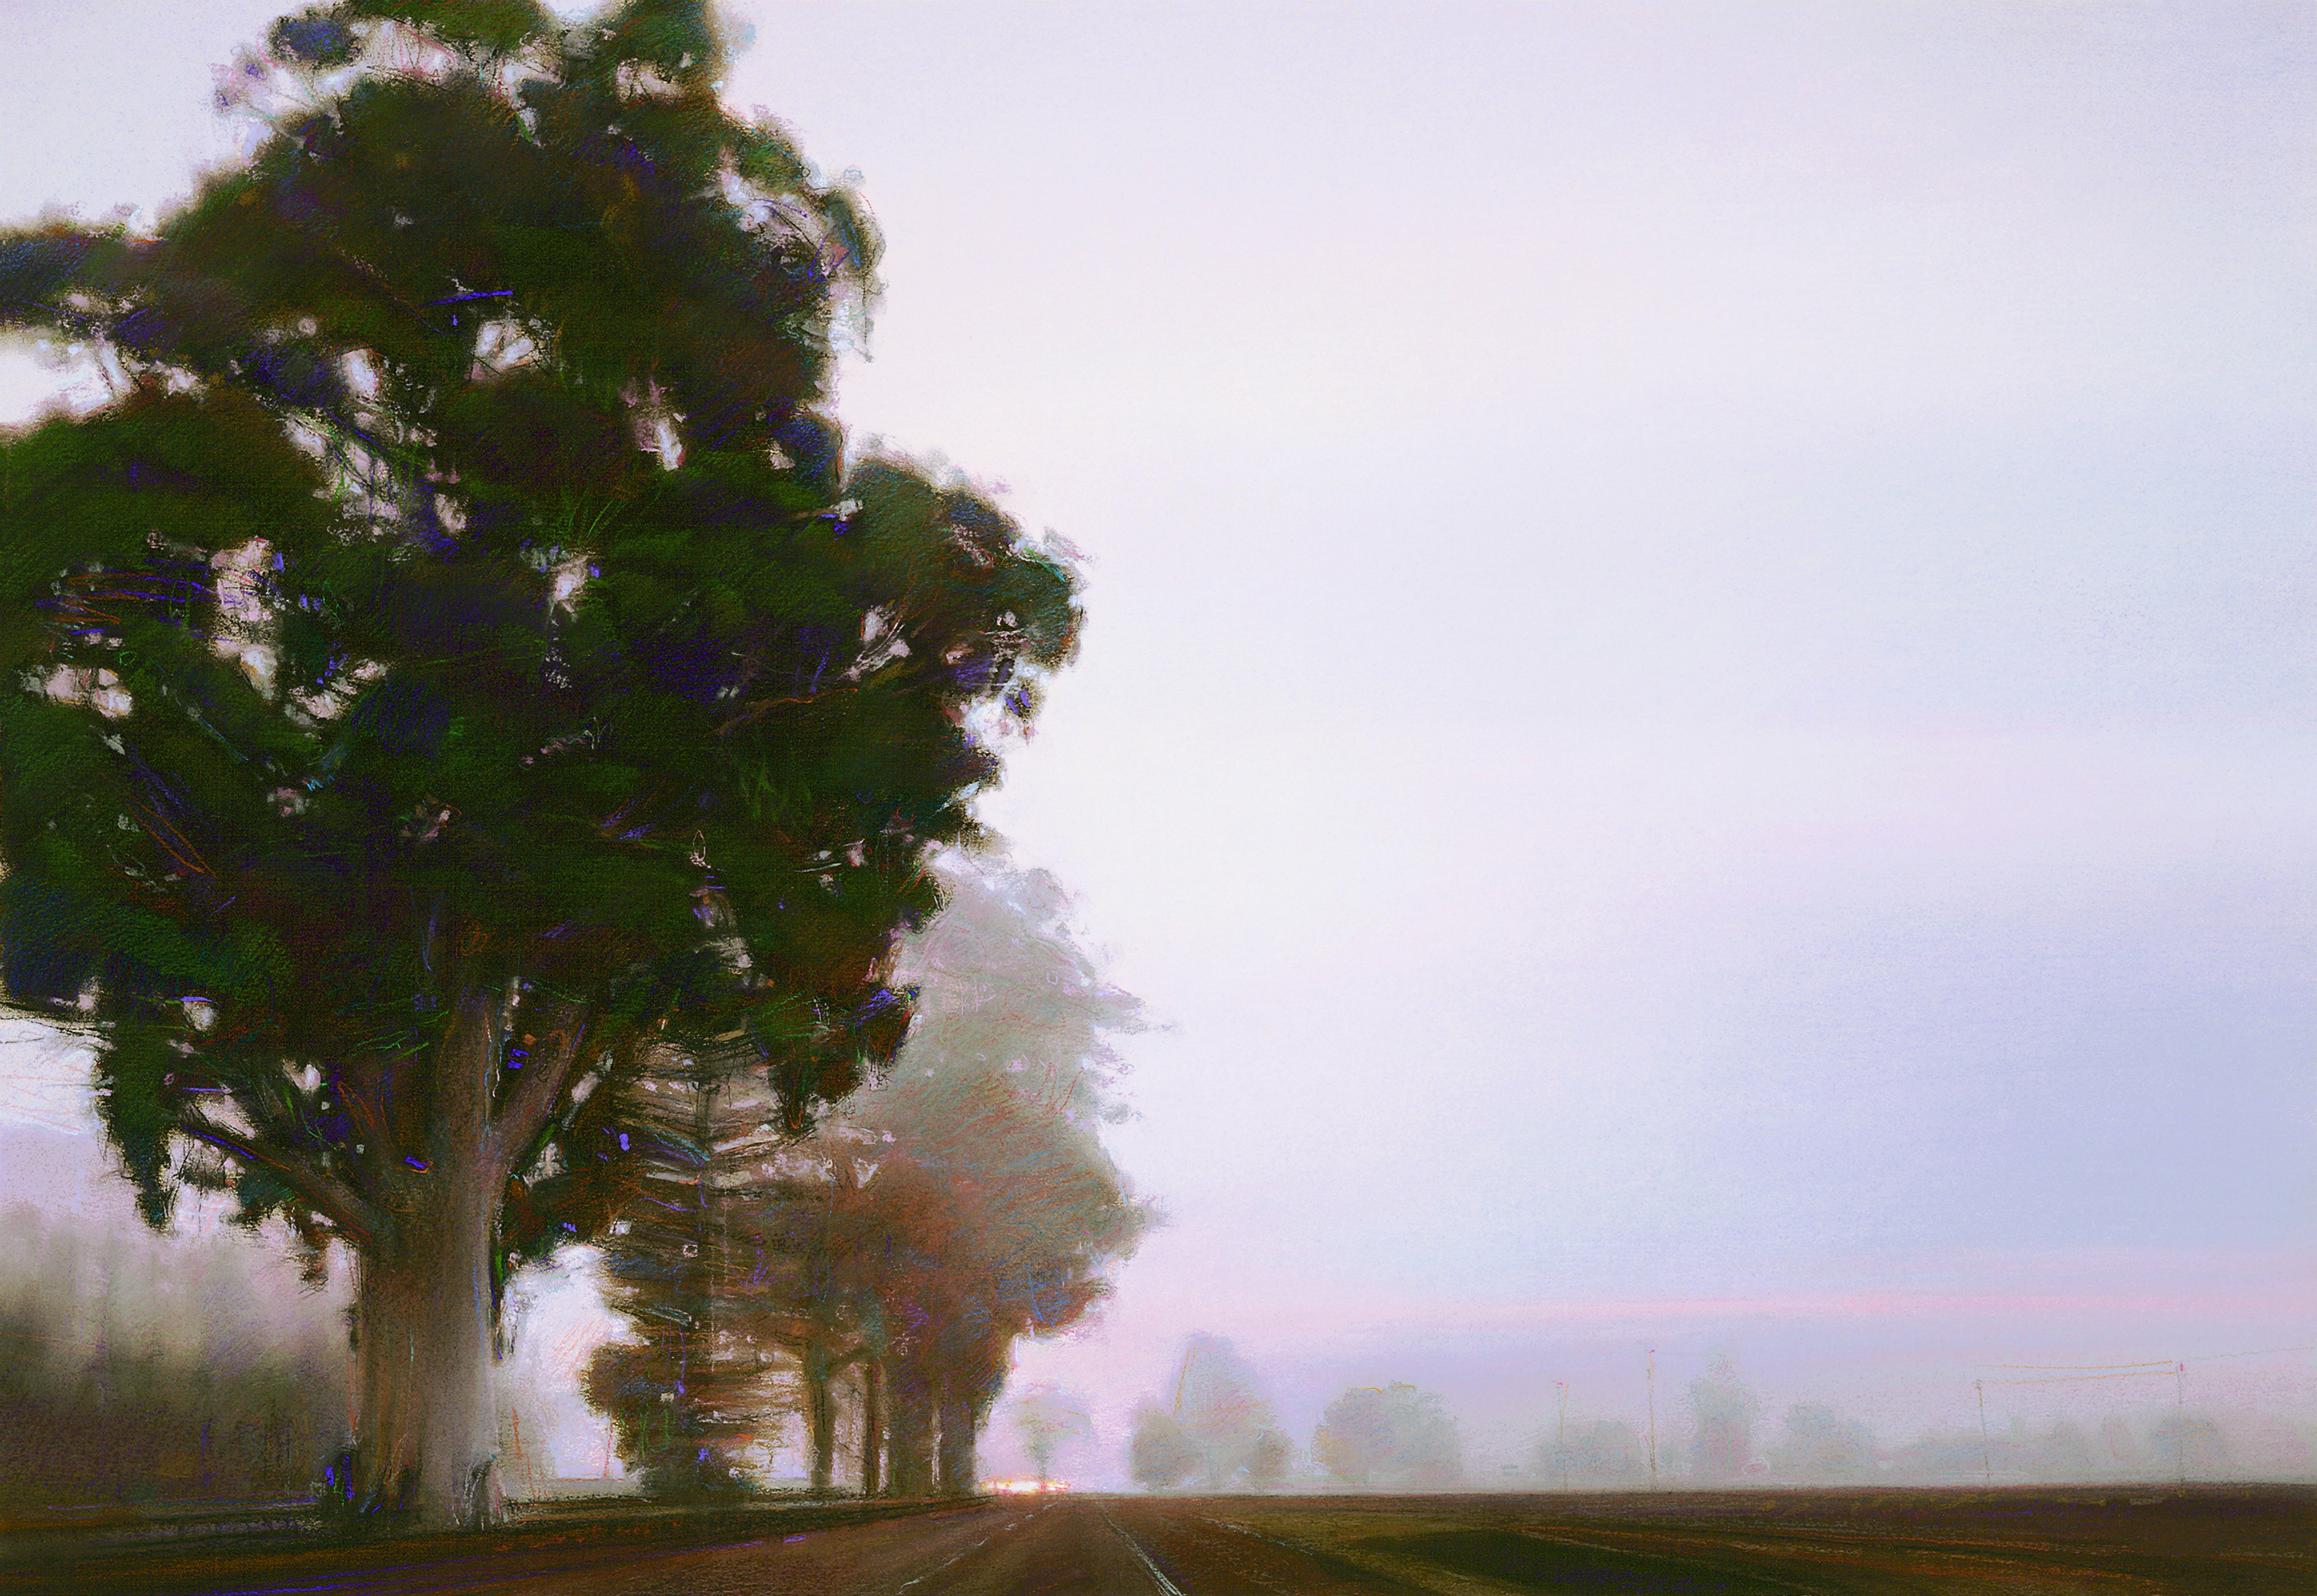 Steven Gordon; The Big Eucalyptus, 2000, Original Giclee Reproduction, 31 x 21 inches. Artwork description: 241 Limited Edition Print from an original pastel paintingThe revered white ghost eucalyptus tree on Highway 29 - the main road through the Napa Valley wine country.  Late afternoon violet light through the hazy atmosphere.  Heading South from Yountville...